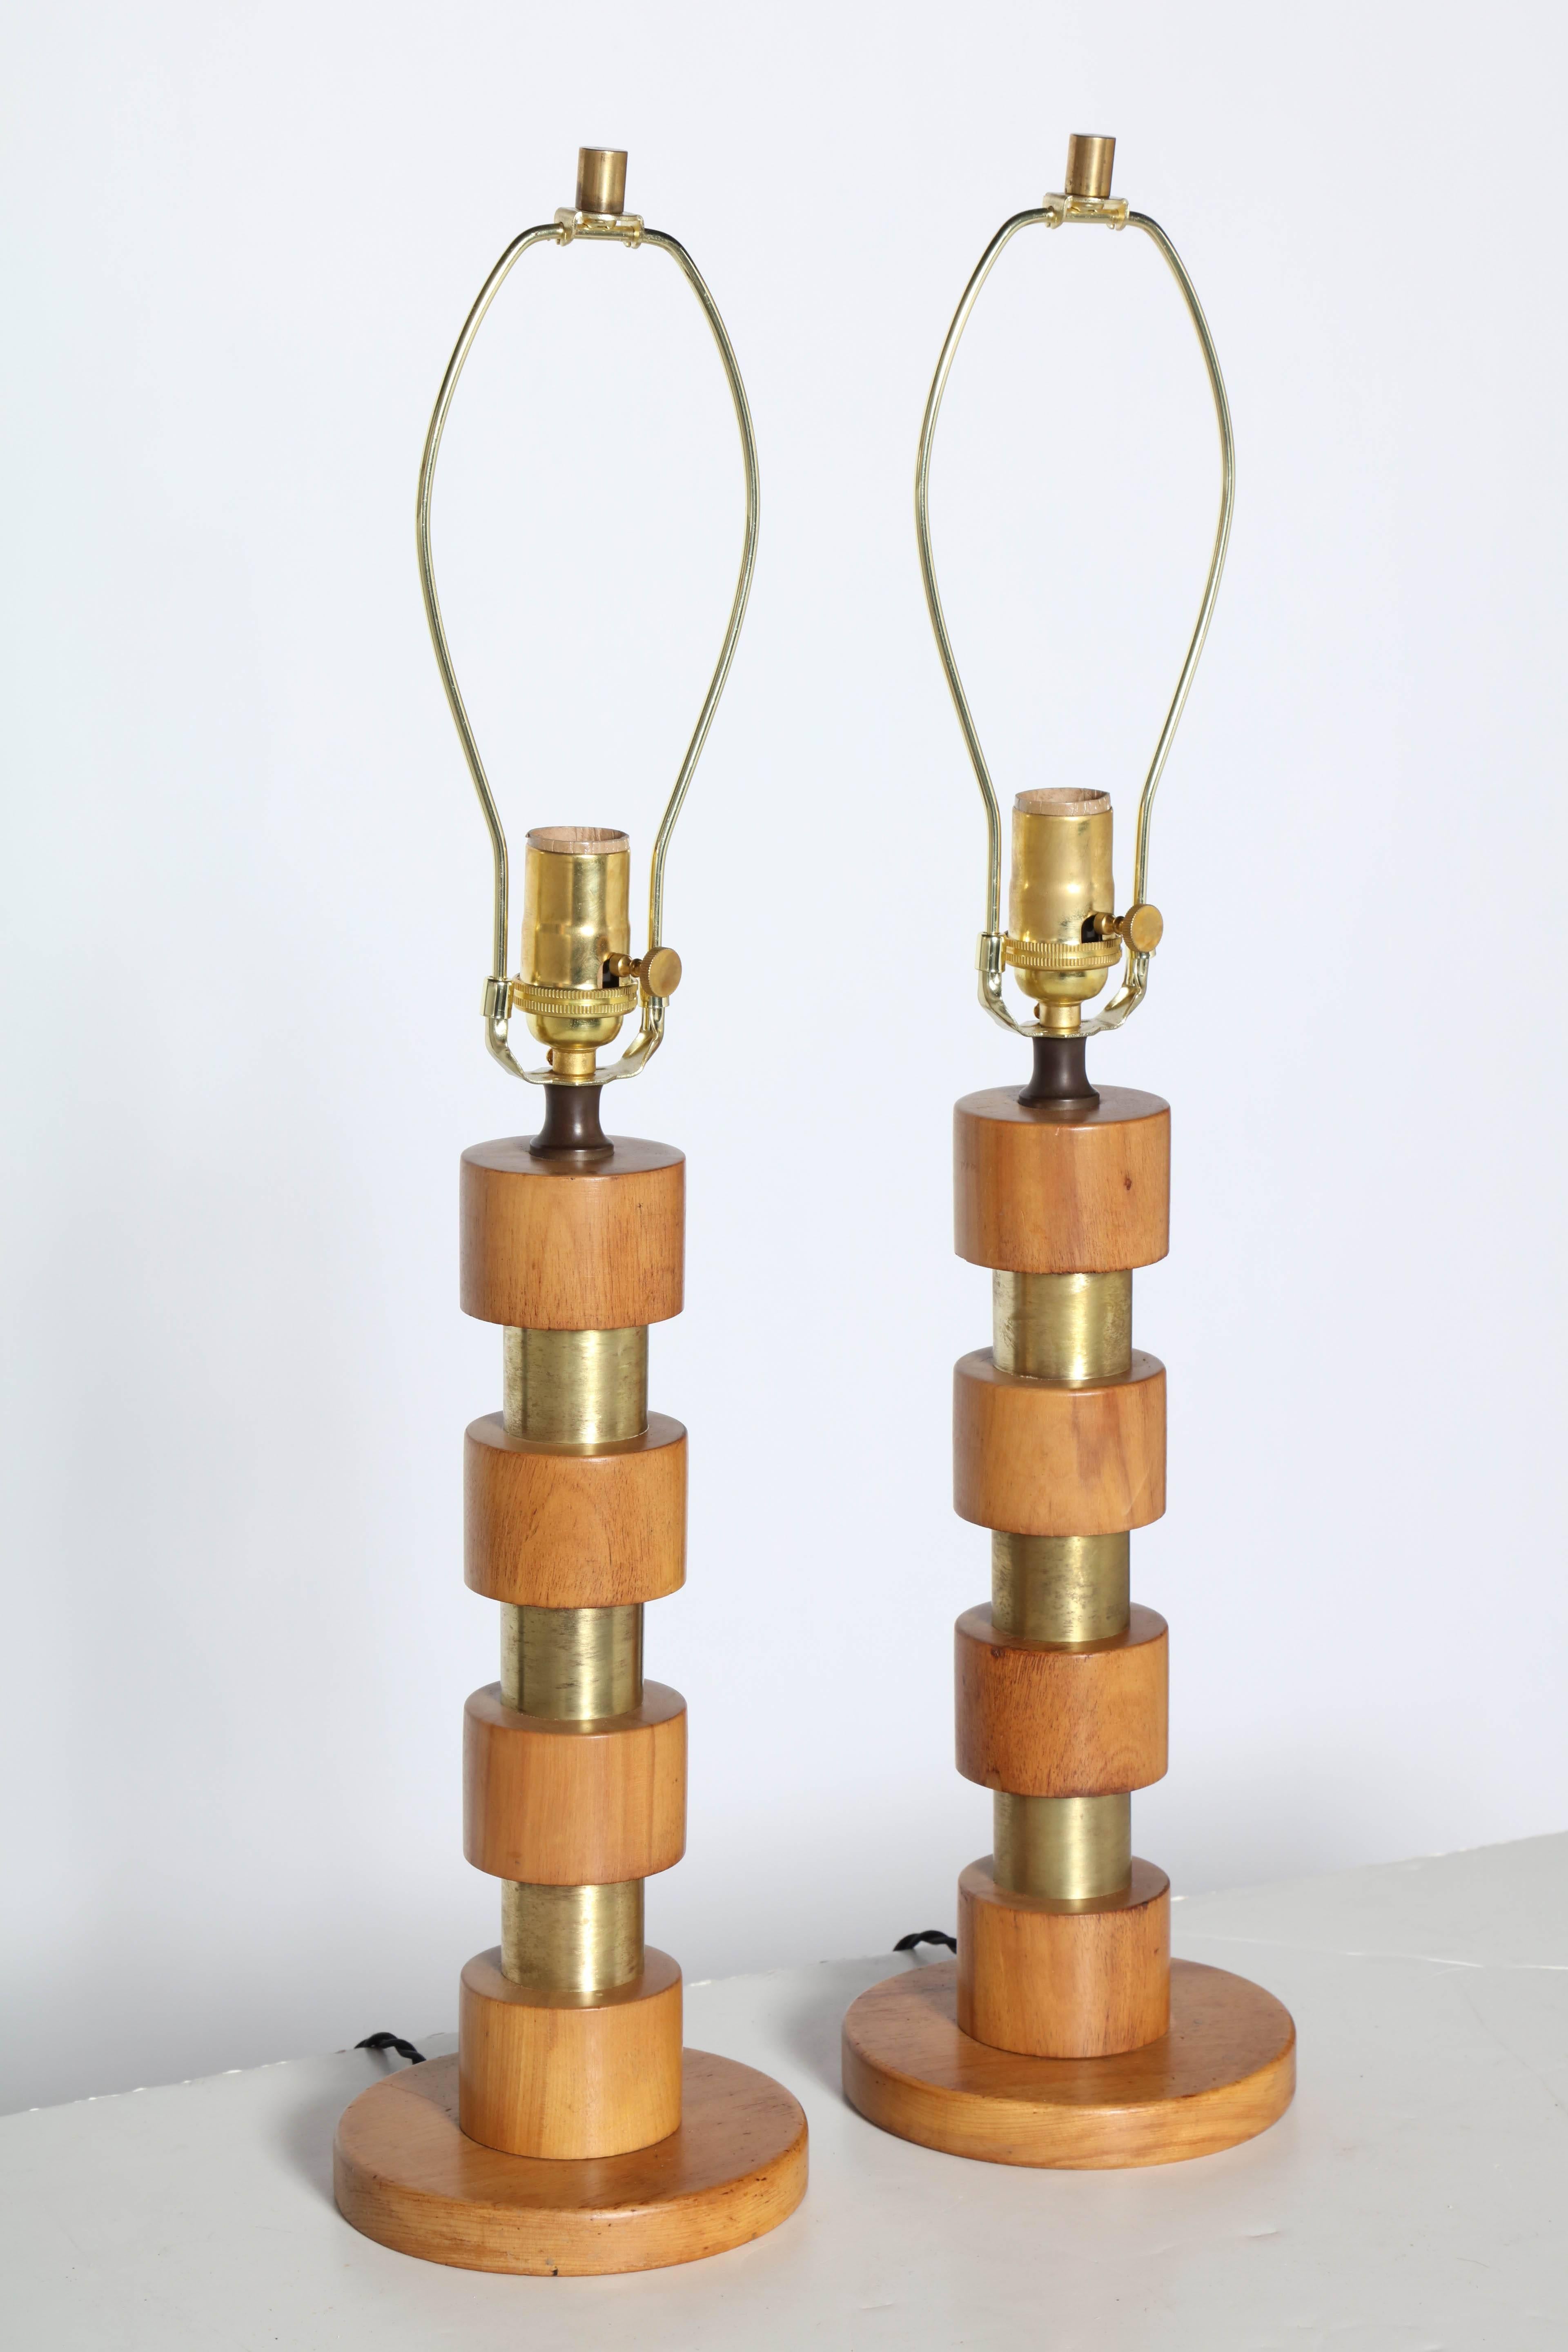 Pair of Brass and Maple Russel Wright Style Bedside Table Lamps, Desk Lamps. Featuring a central Brass column, round stacked Maple discs and round 6D Maple base. Sculptural. Industrial. Architectural. Dimensional. Warm. Natural. Study. Library.